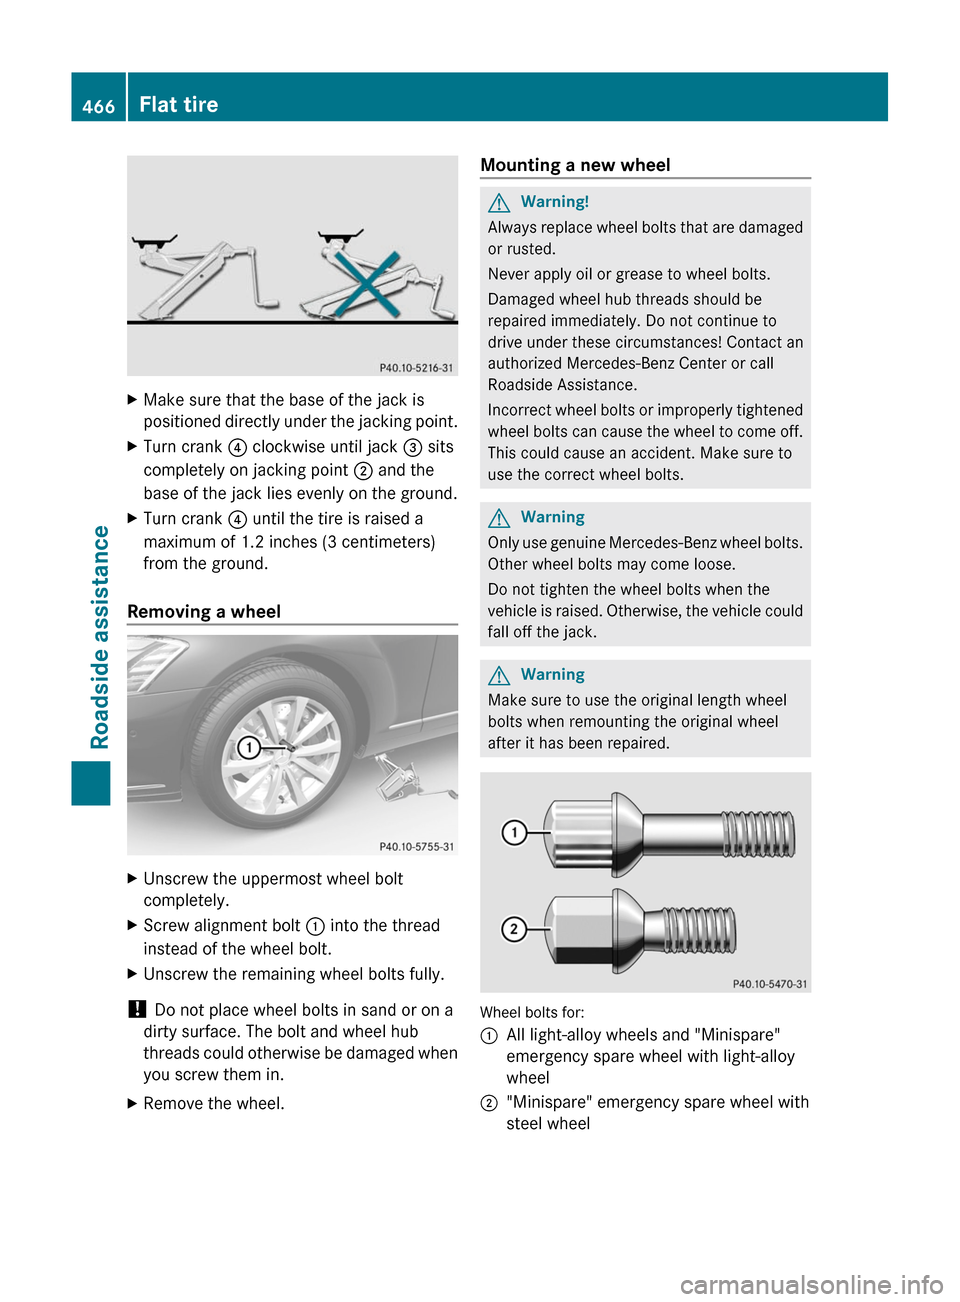 MERCEDES-BENZ S-Class 2011 W221 Service Manual XMake sure that the base of the jack is
positioned directly under the jacking point.
XTurn crank ? clockwise until jack = sits
completely on jacking point ; and the
base of the jack lies evenly on the